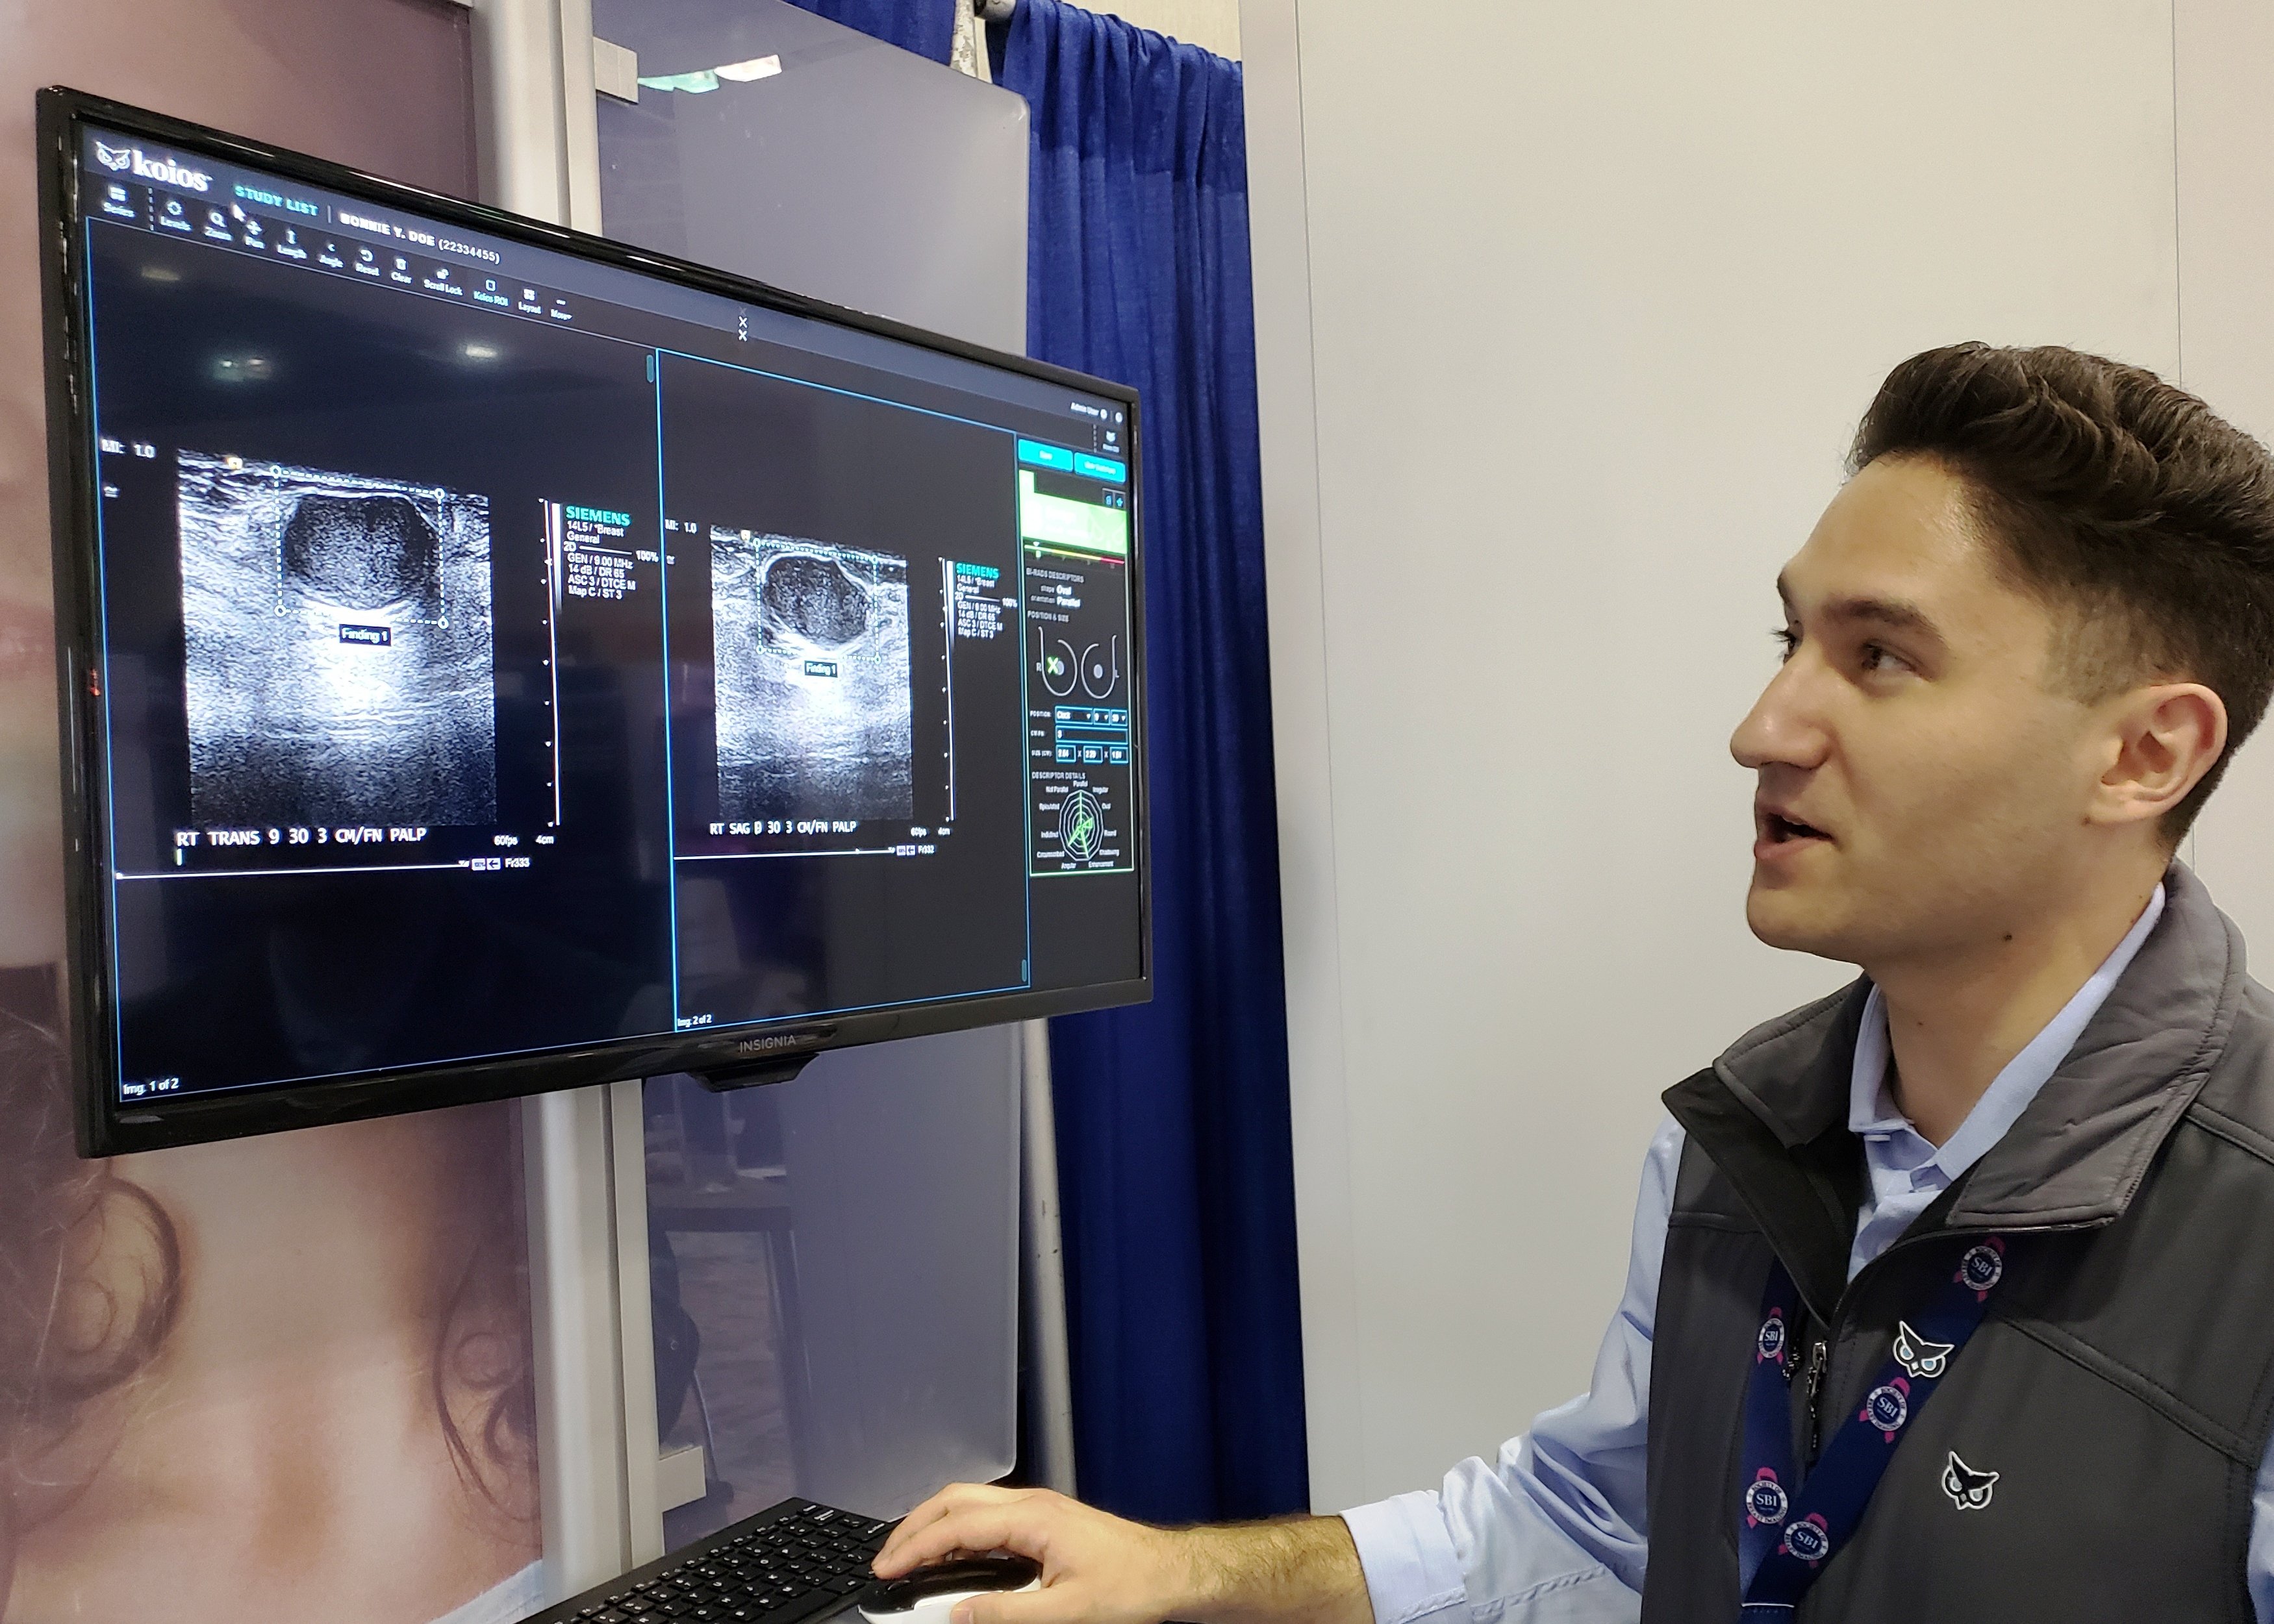 In a demonstration on the exhibit floor of the SBI symposium, Koios software identified suspicious lesions in ultrasound images